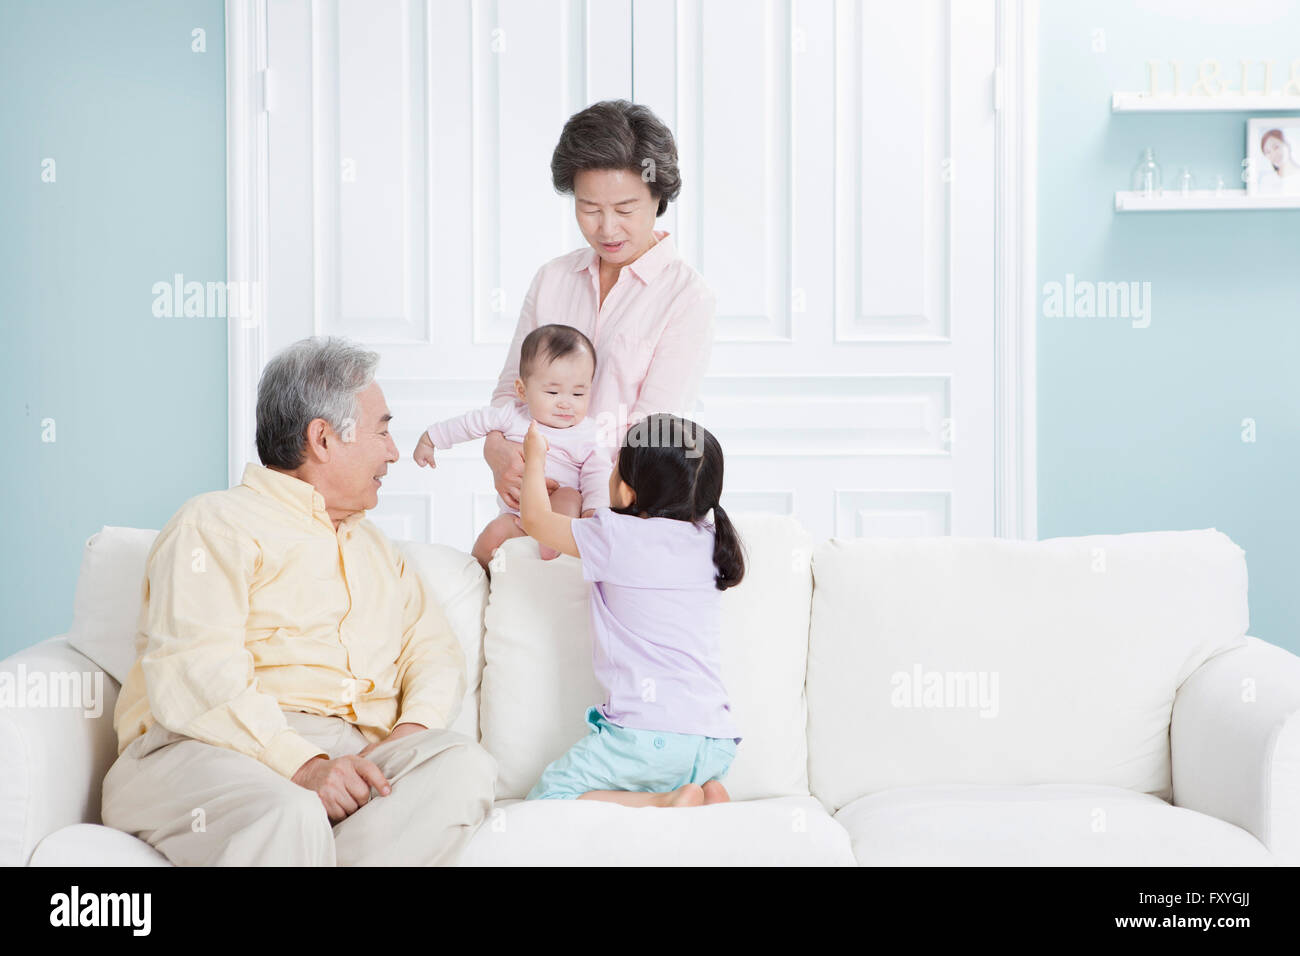 Grandmother holding a baby behind a couch and grandfather with granddaughter seated on a couch and looking at the baby with a smile Stock Photo